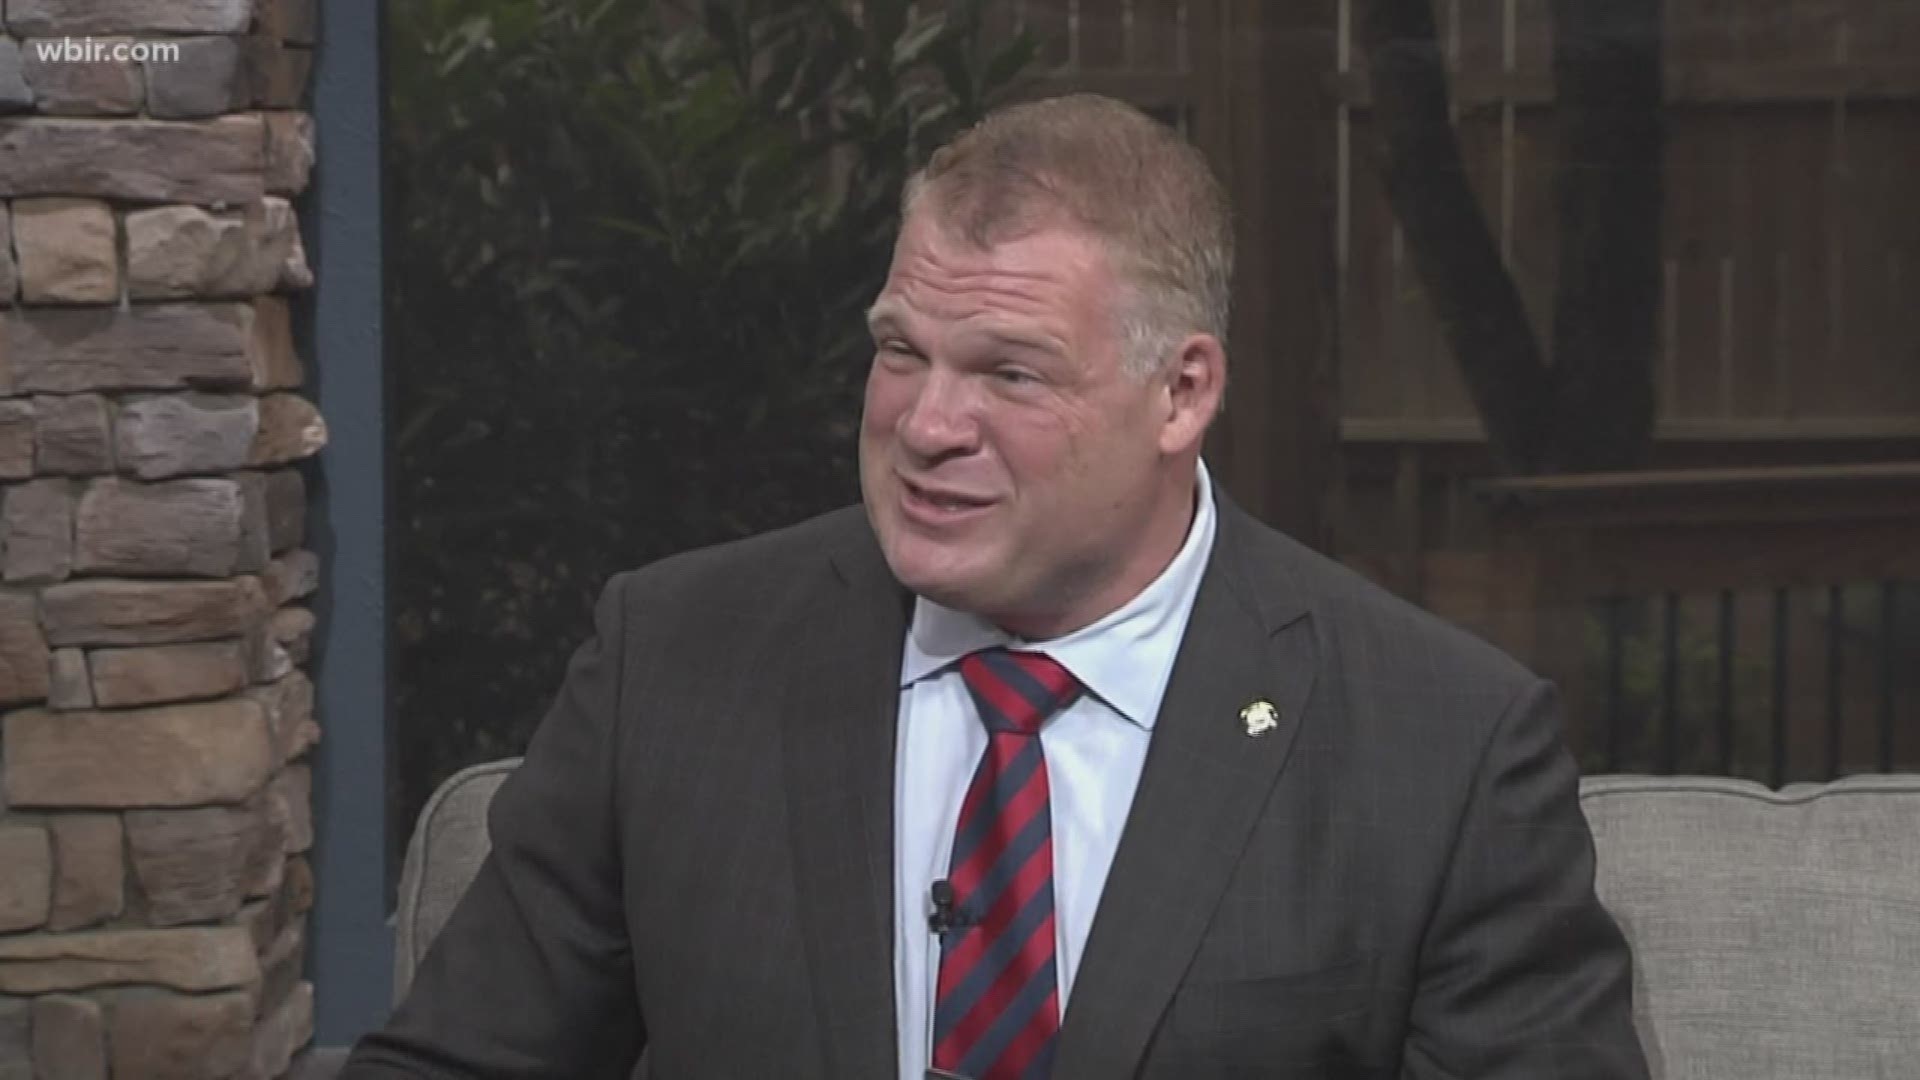 Glenn Jacobs, aka as WWE wrestler Kane, talks about a wide range of topics, including the decision to wrestle at an event in Saudi Arabia, his recent visit to the White House to witness Pres. Trump signing opioid legislation, and the ongoing pension debat